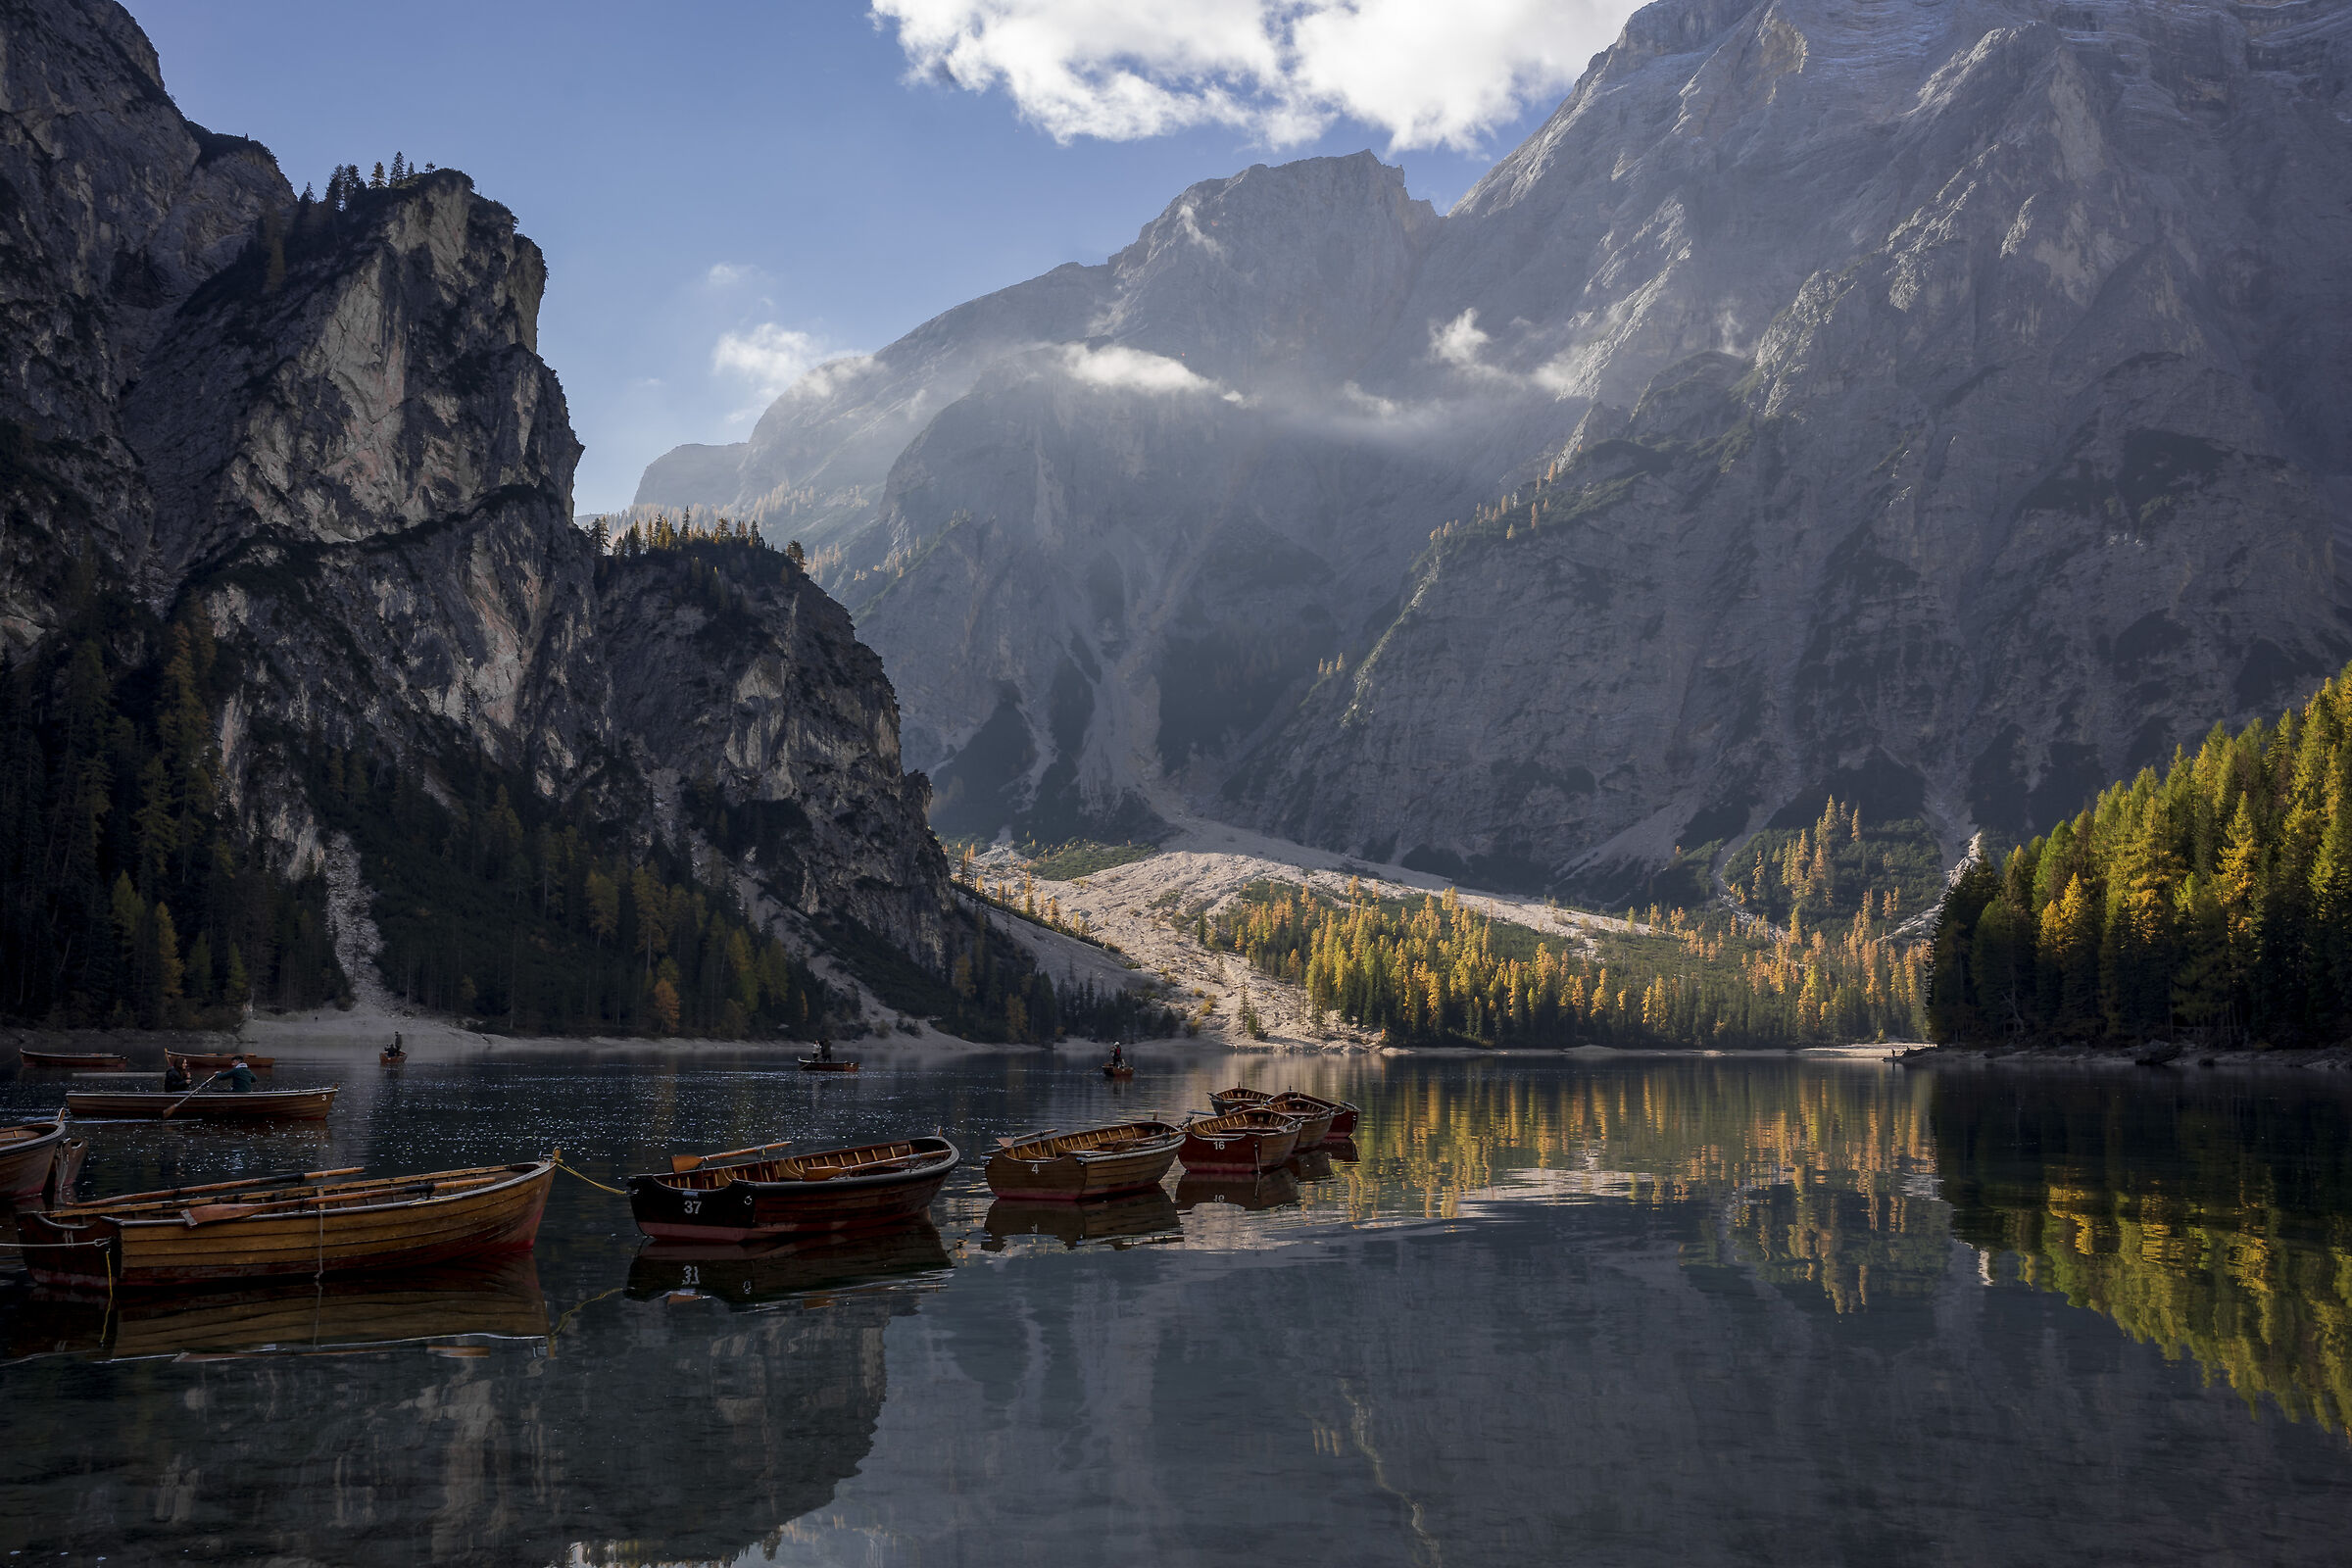 The first impact with Lake Braies...